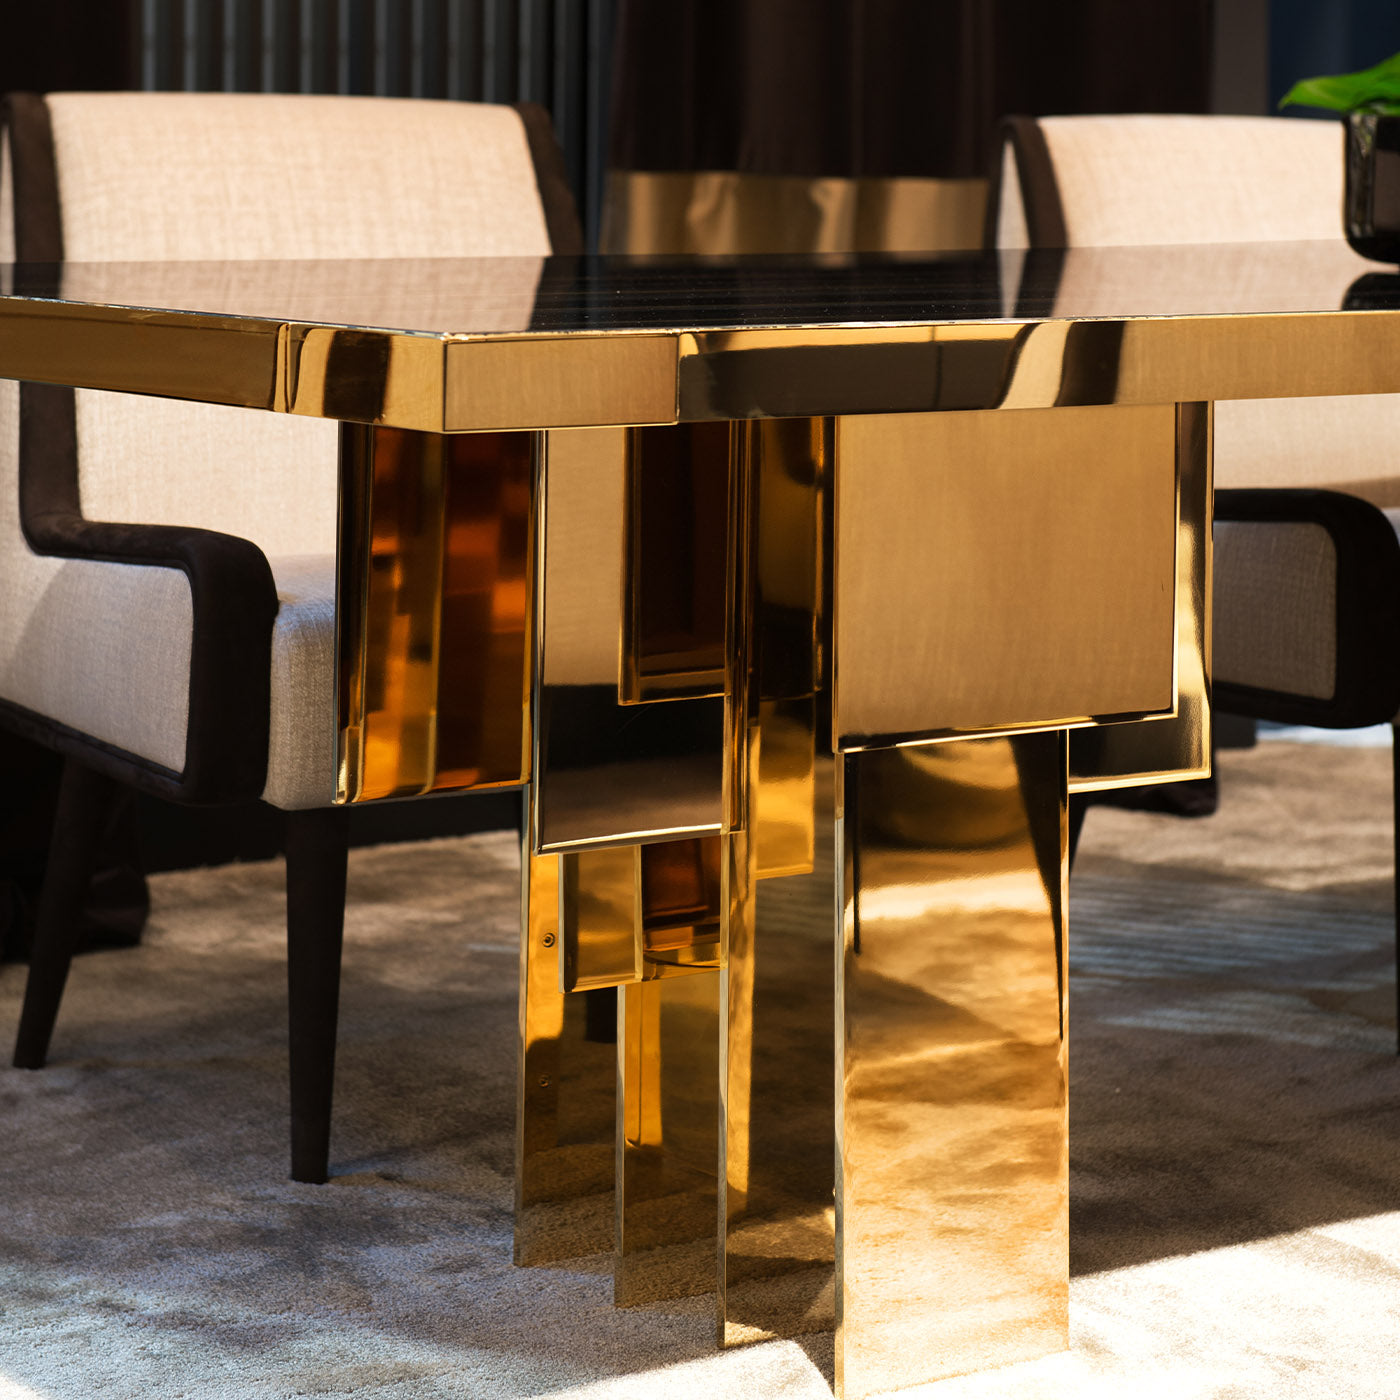 Cheviot Dining Table by Giannella Ventura - Alternative view 2